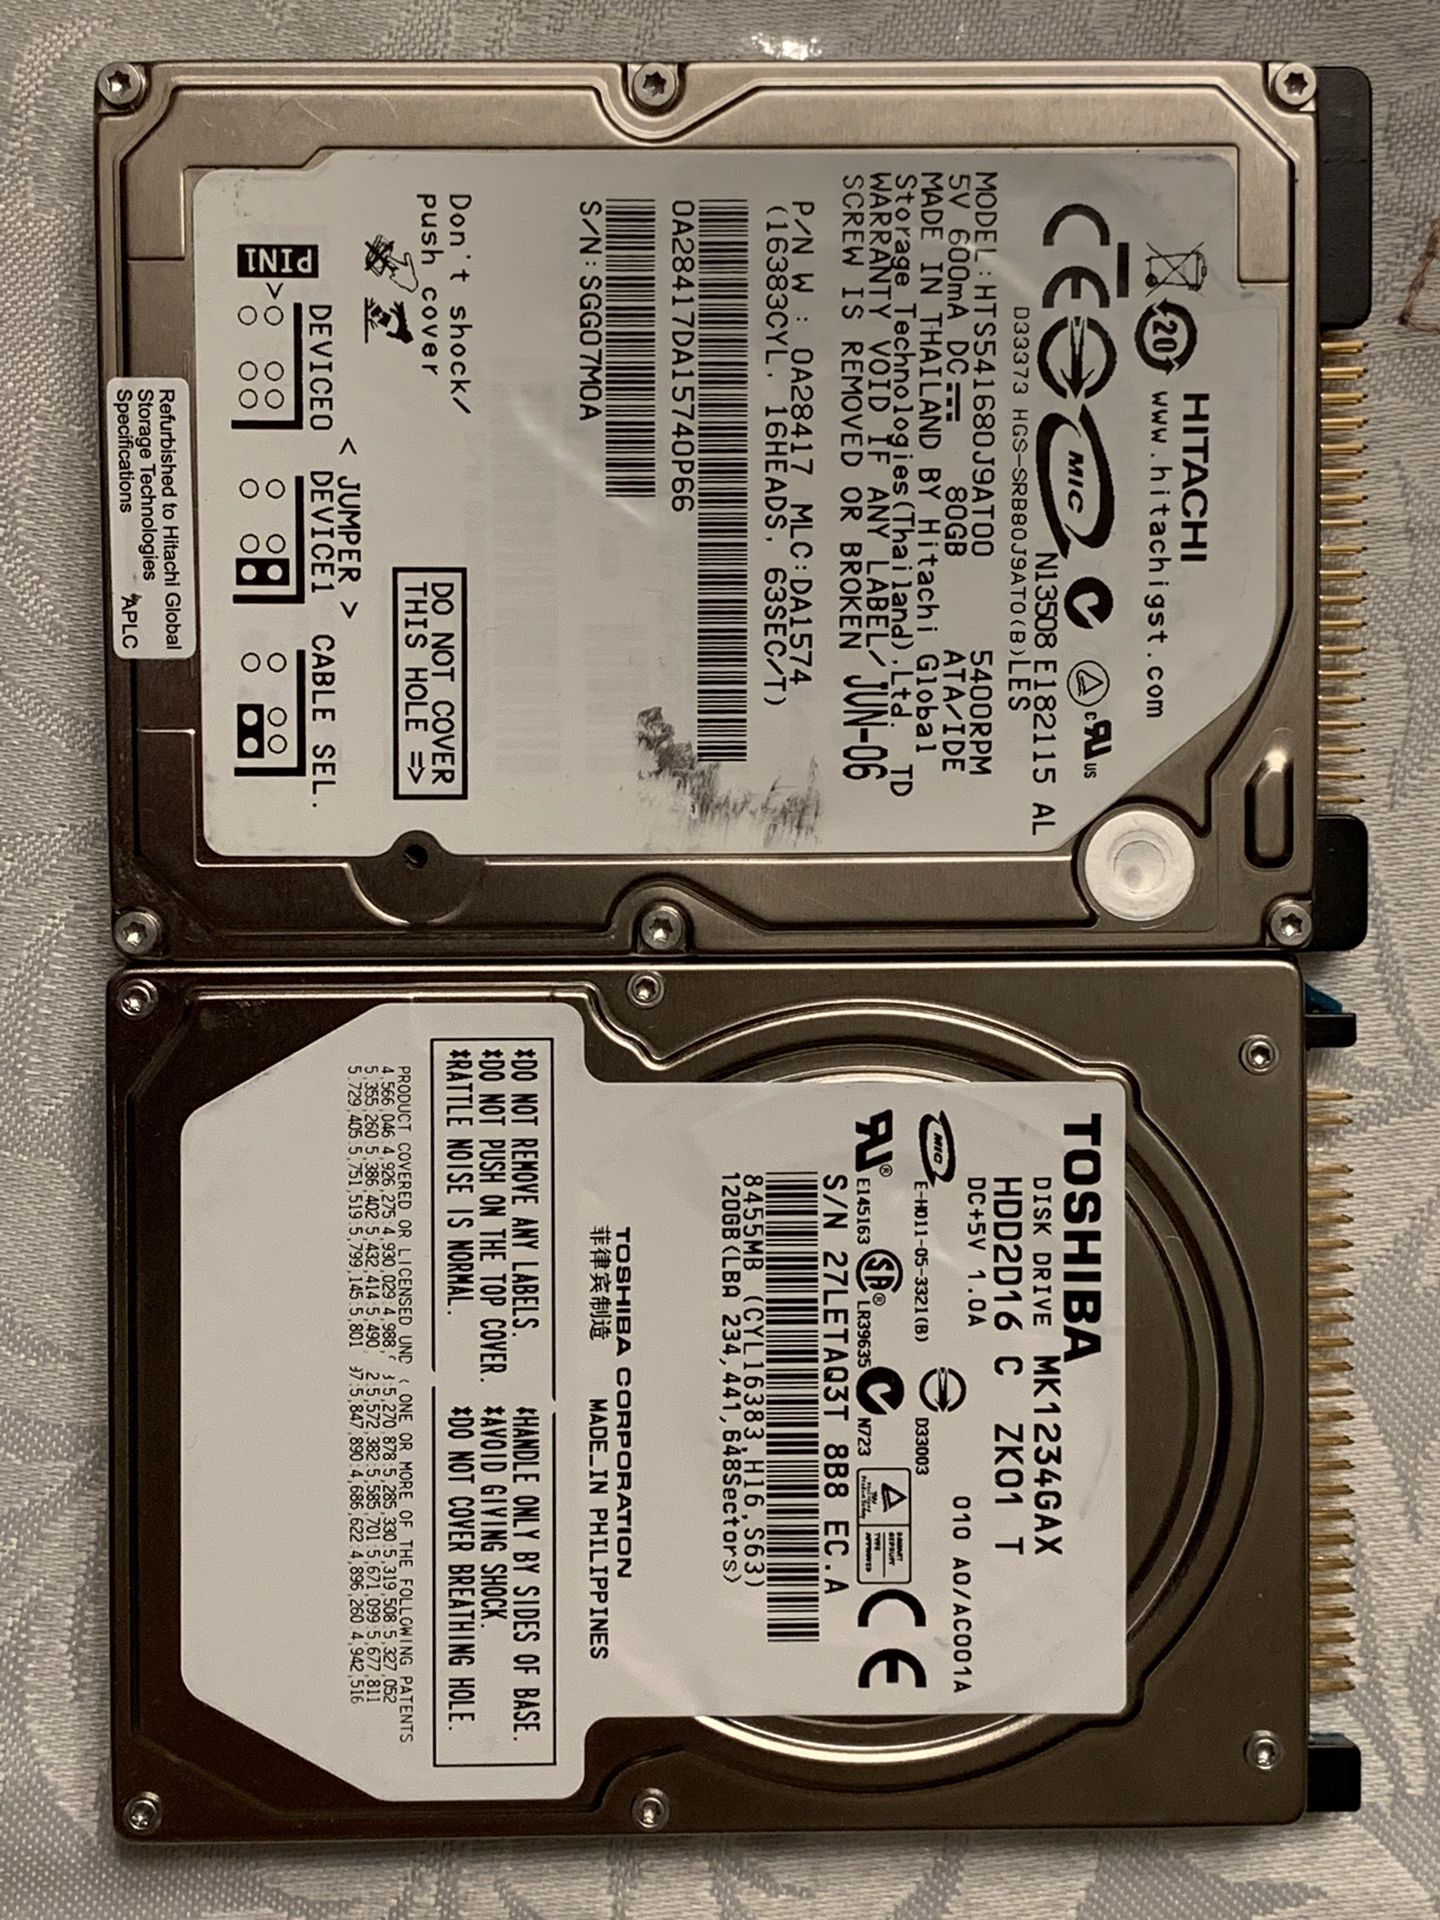 Hitachi 80GB and Toshiba 120GB 3.5” IDE HDD for notebook